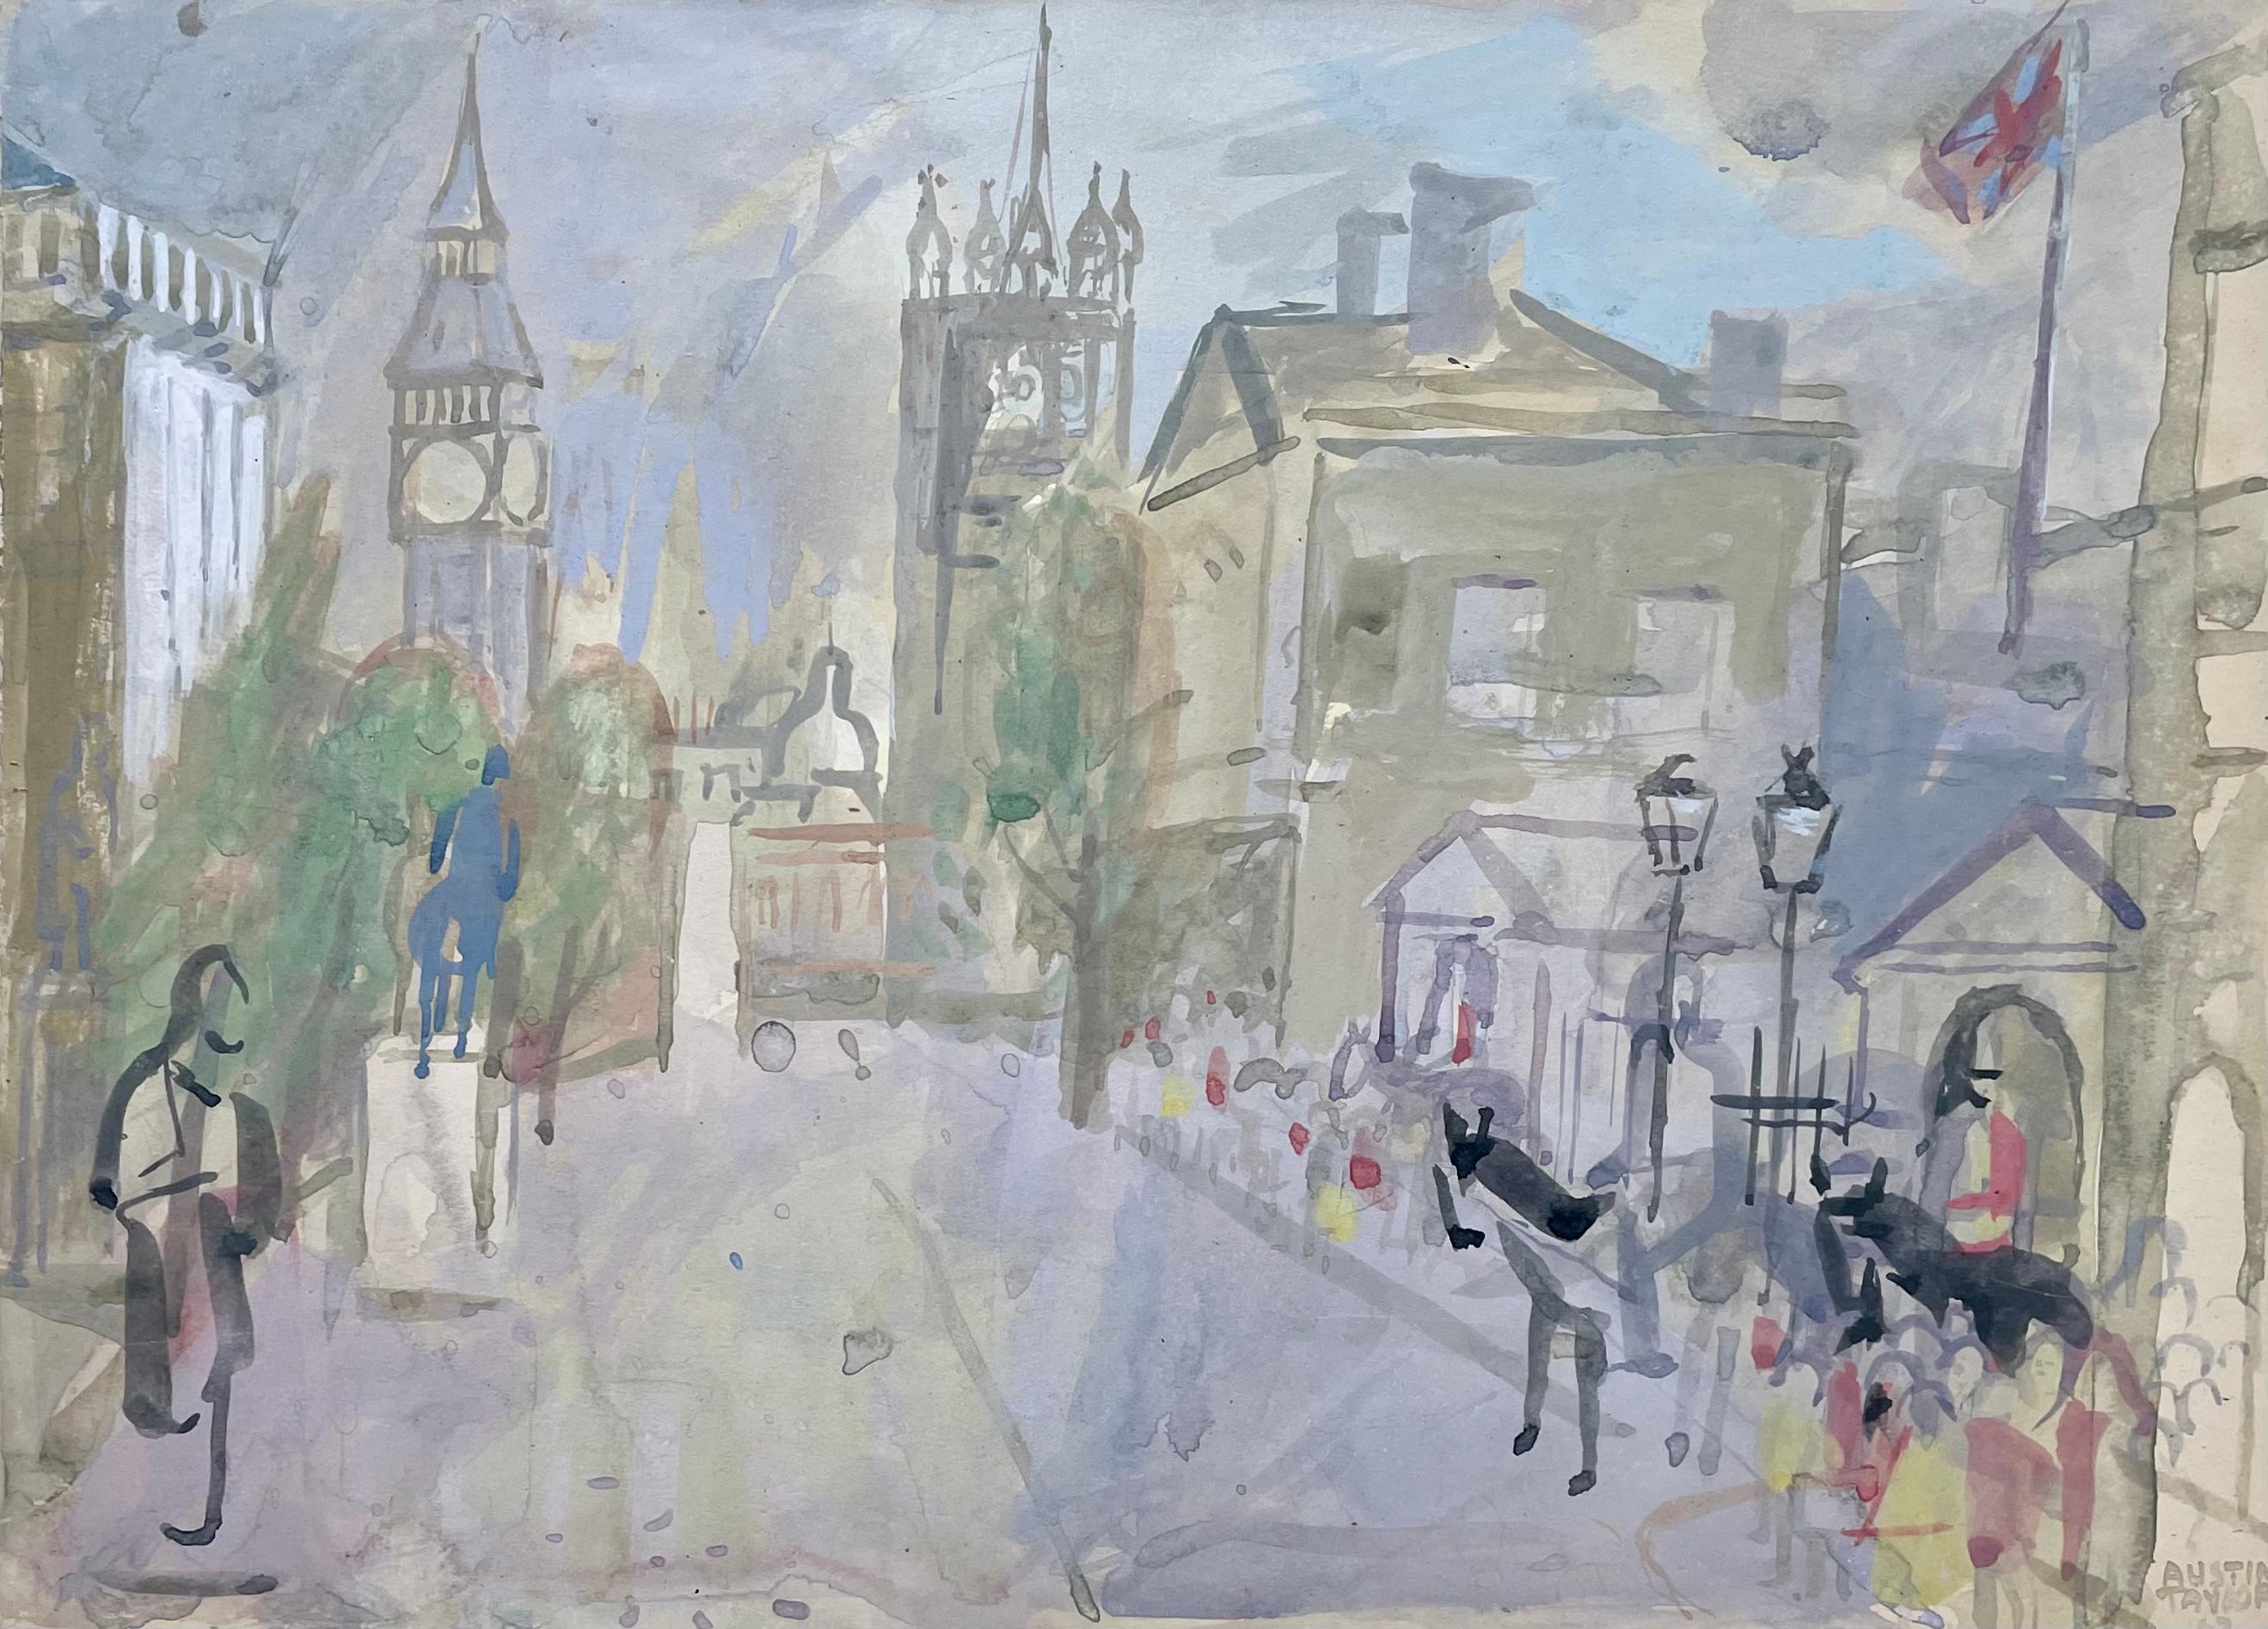 Horse Guards - 20th Century British watercolour of London by Austin Taylor